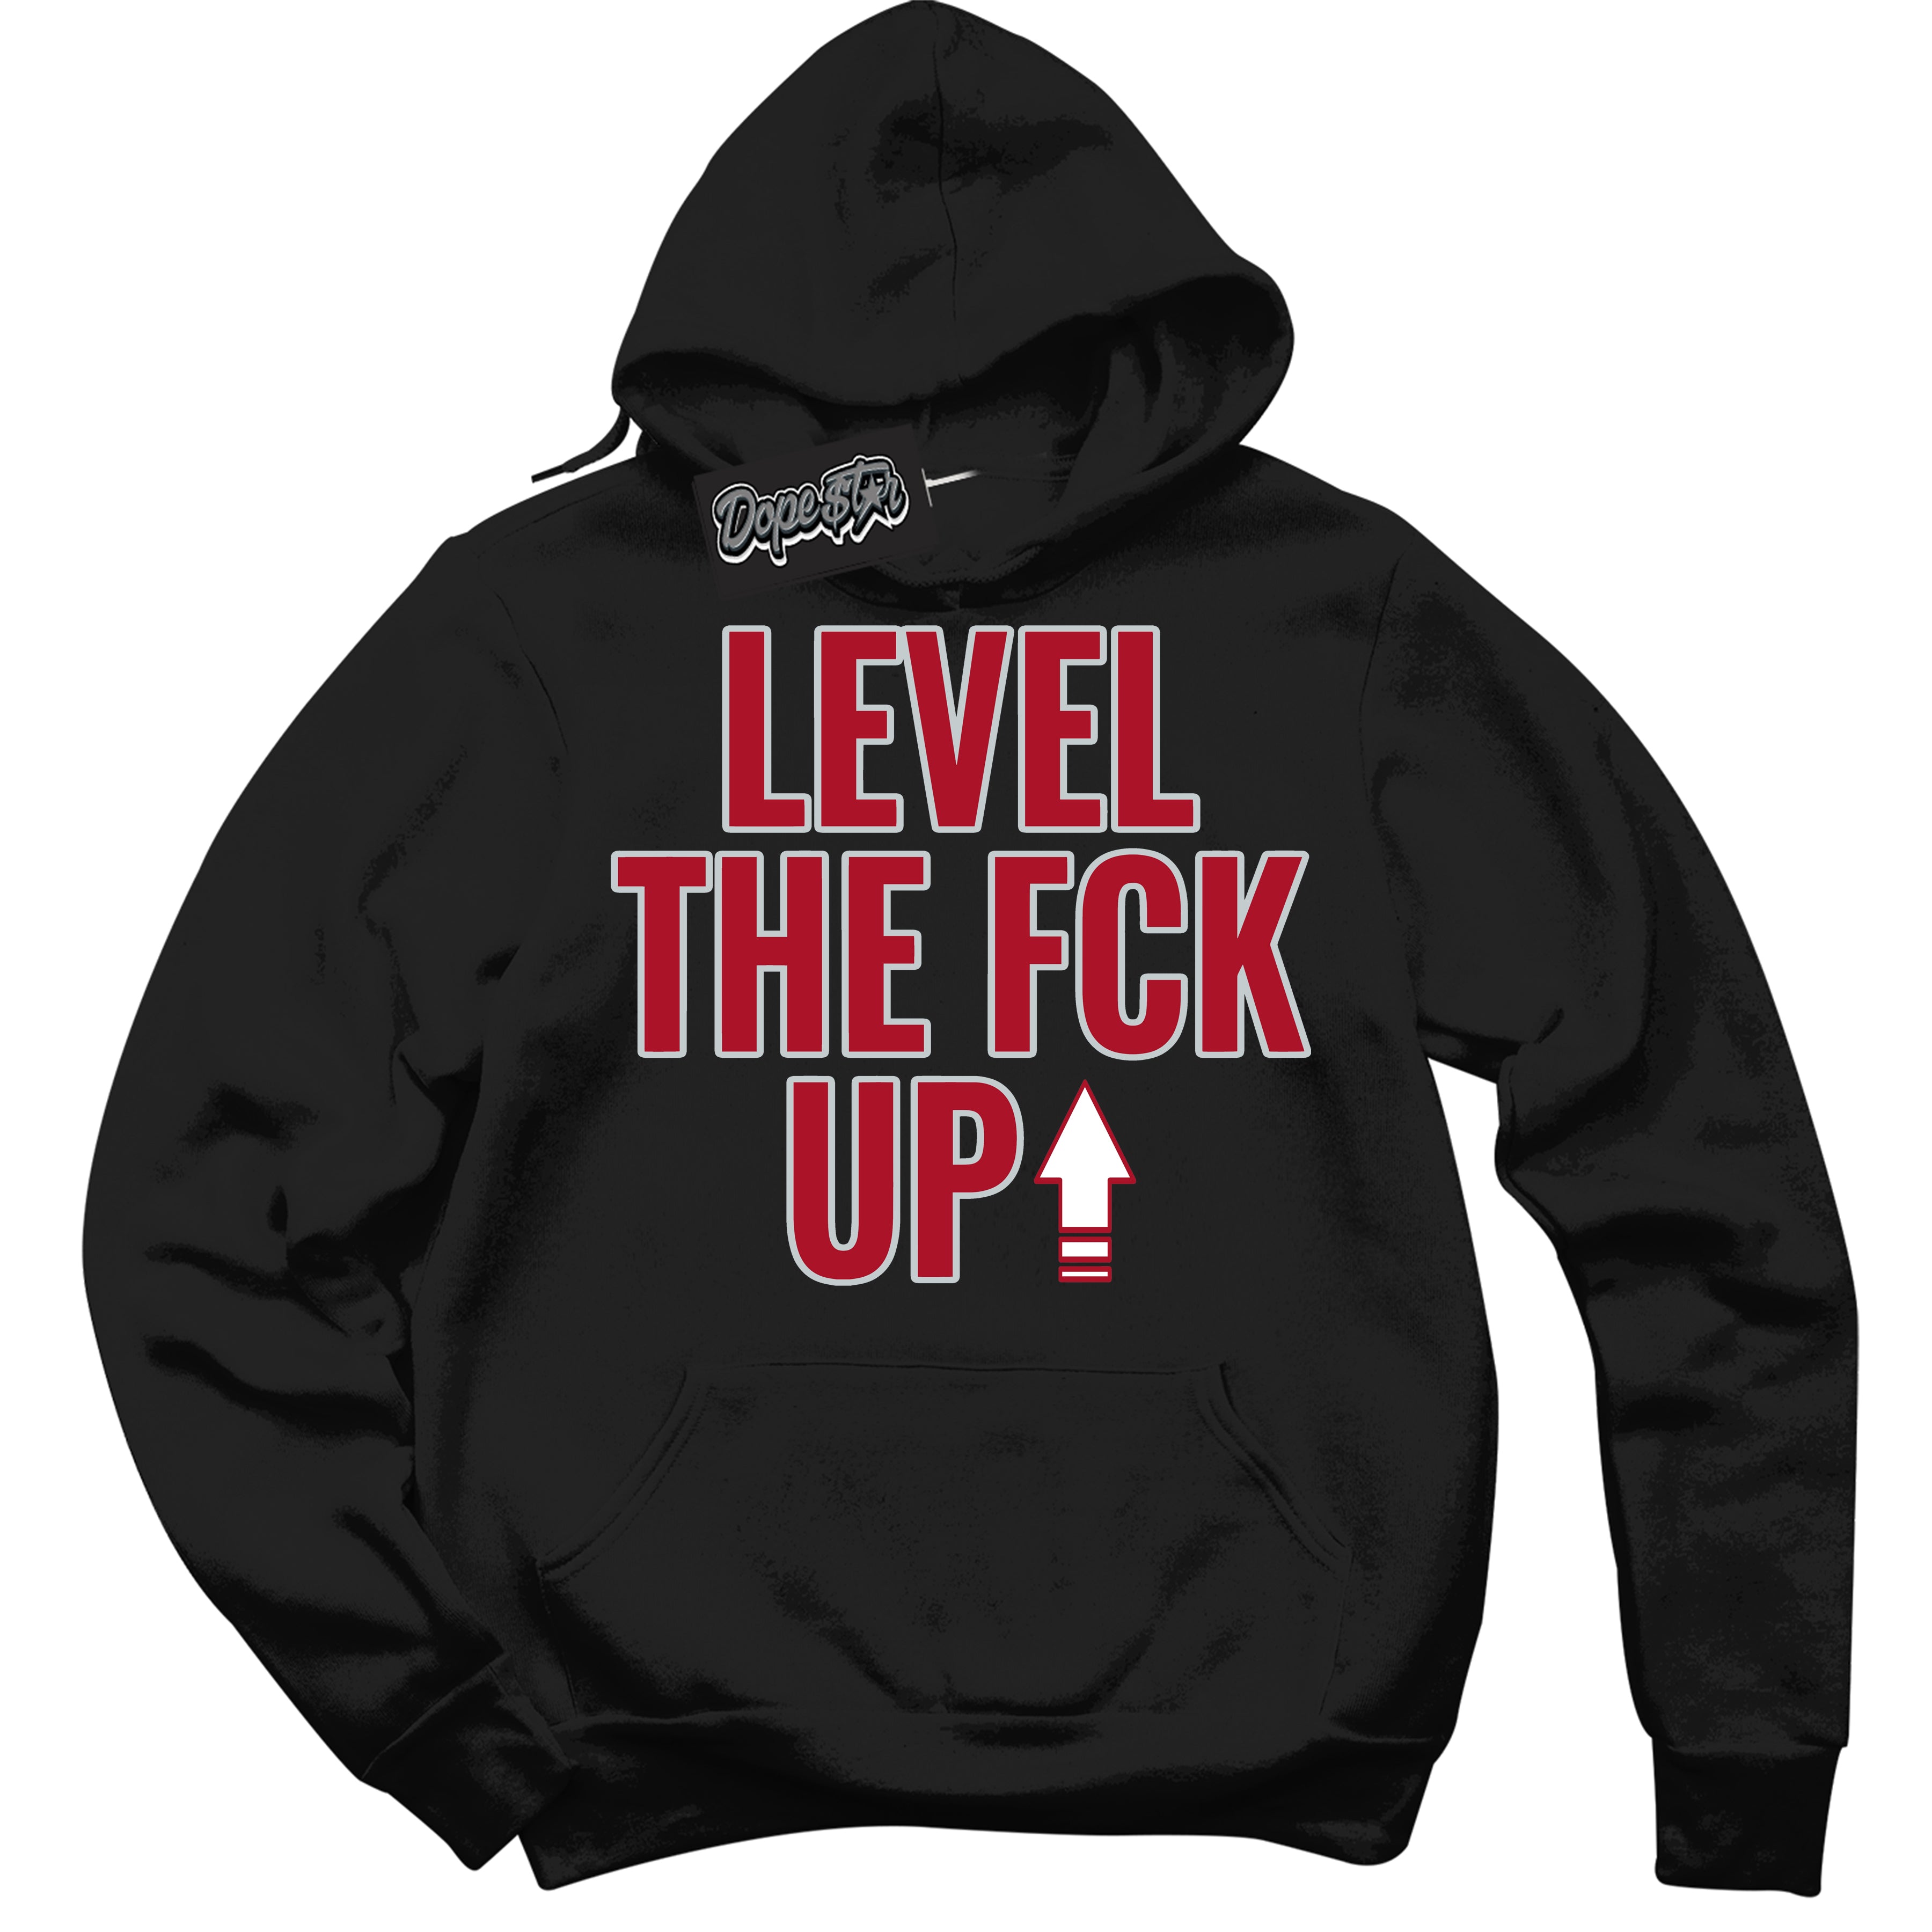 Cool Black Hoodie with “ Level The Fck Up ”  design that Perfectly Matches  Reverse Ultraman Sneakers.